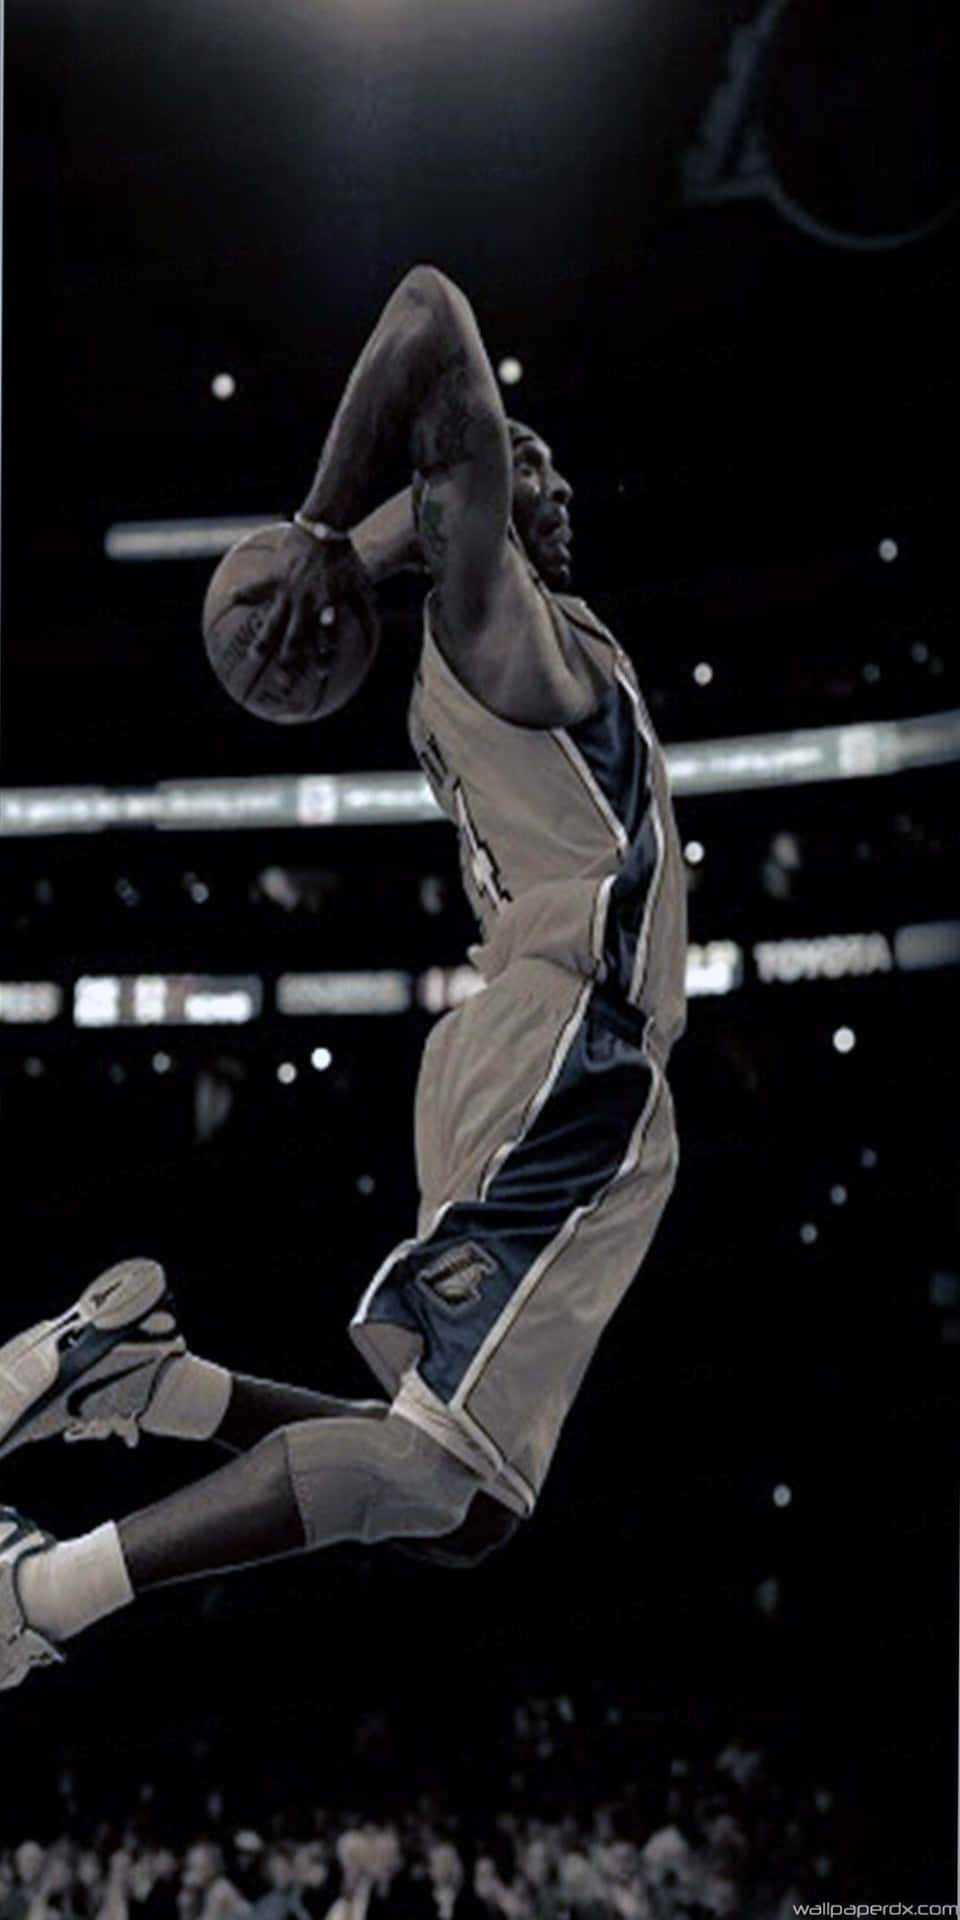 A Basketball Player In The Air